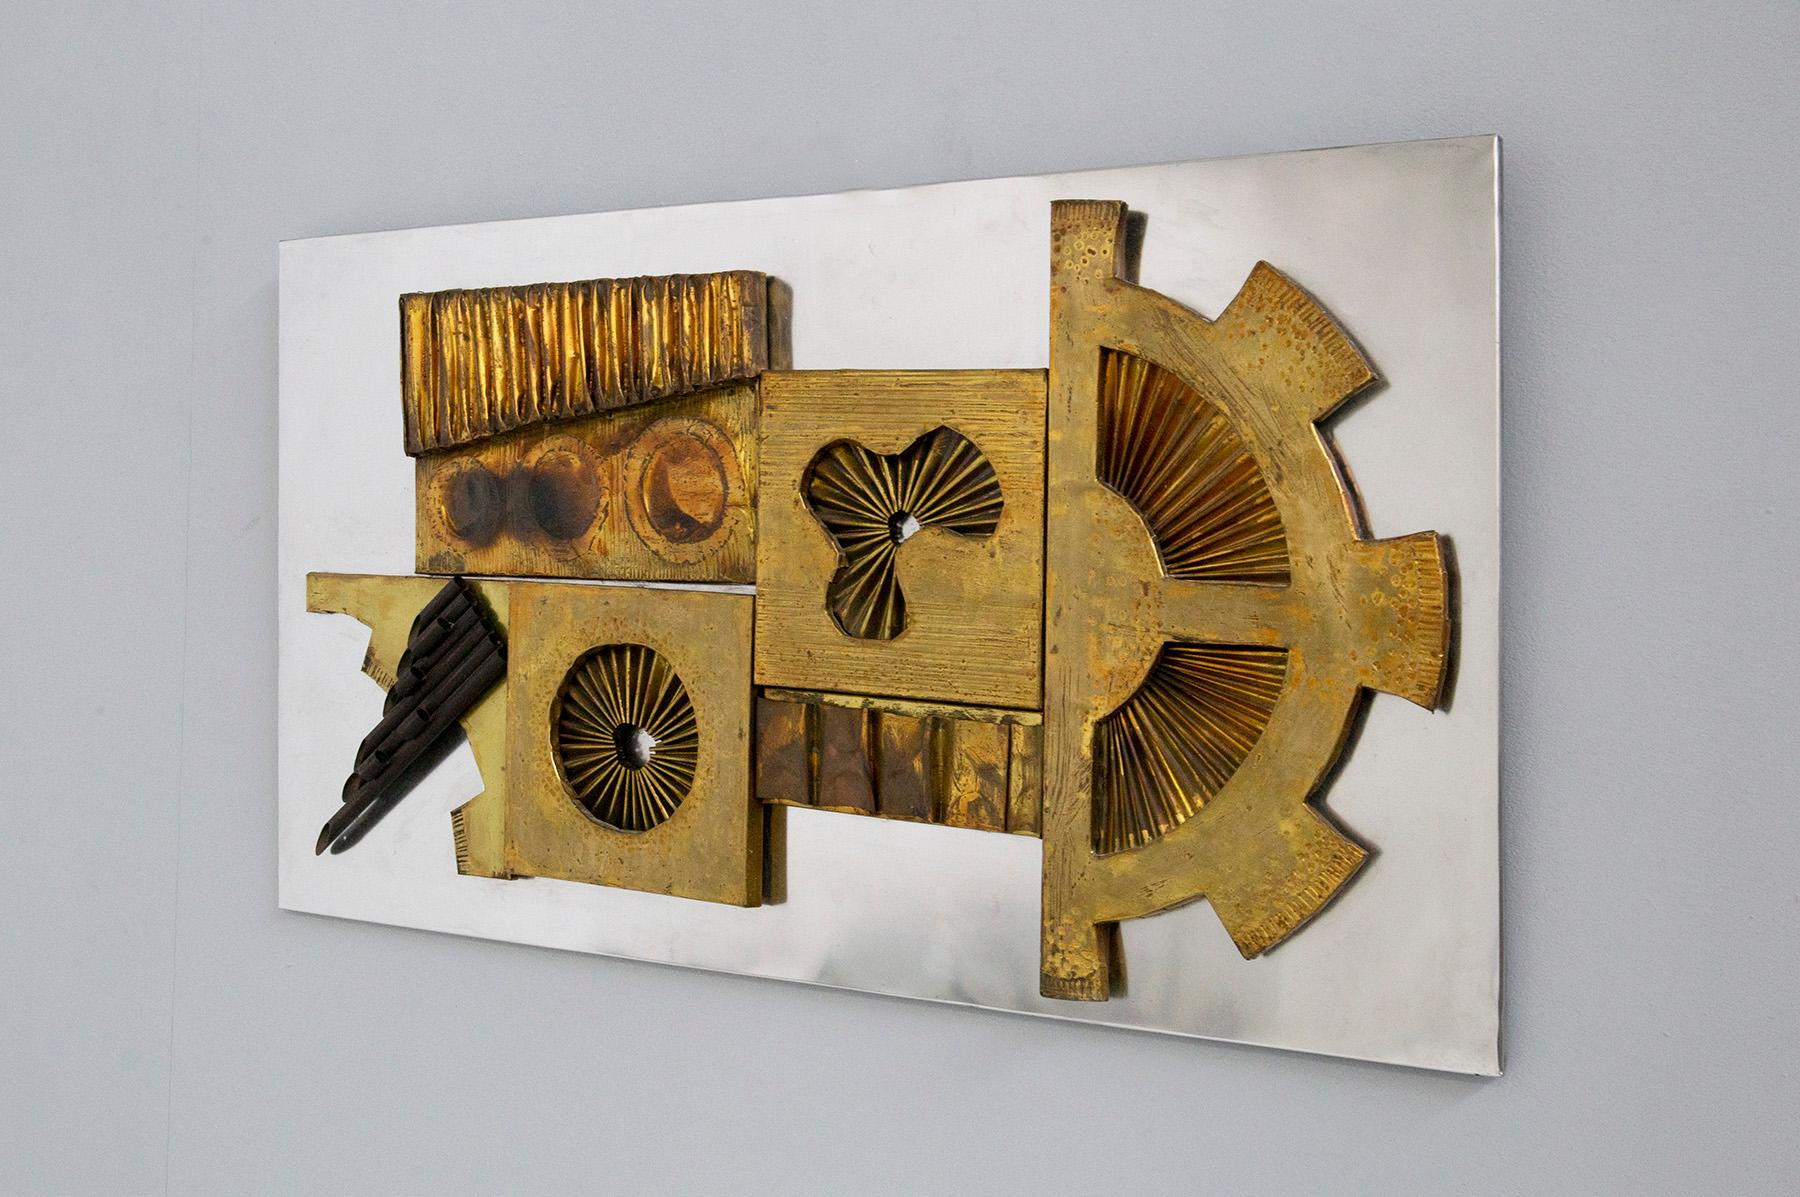 Chinese Stephen Chun Brutalist Abstract Wall Sculpture in Brass and Copper Attributed